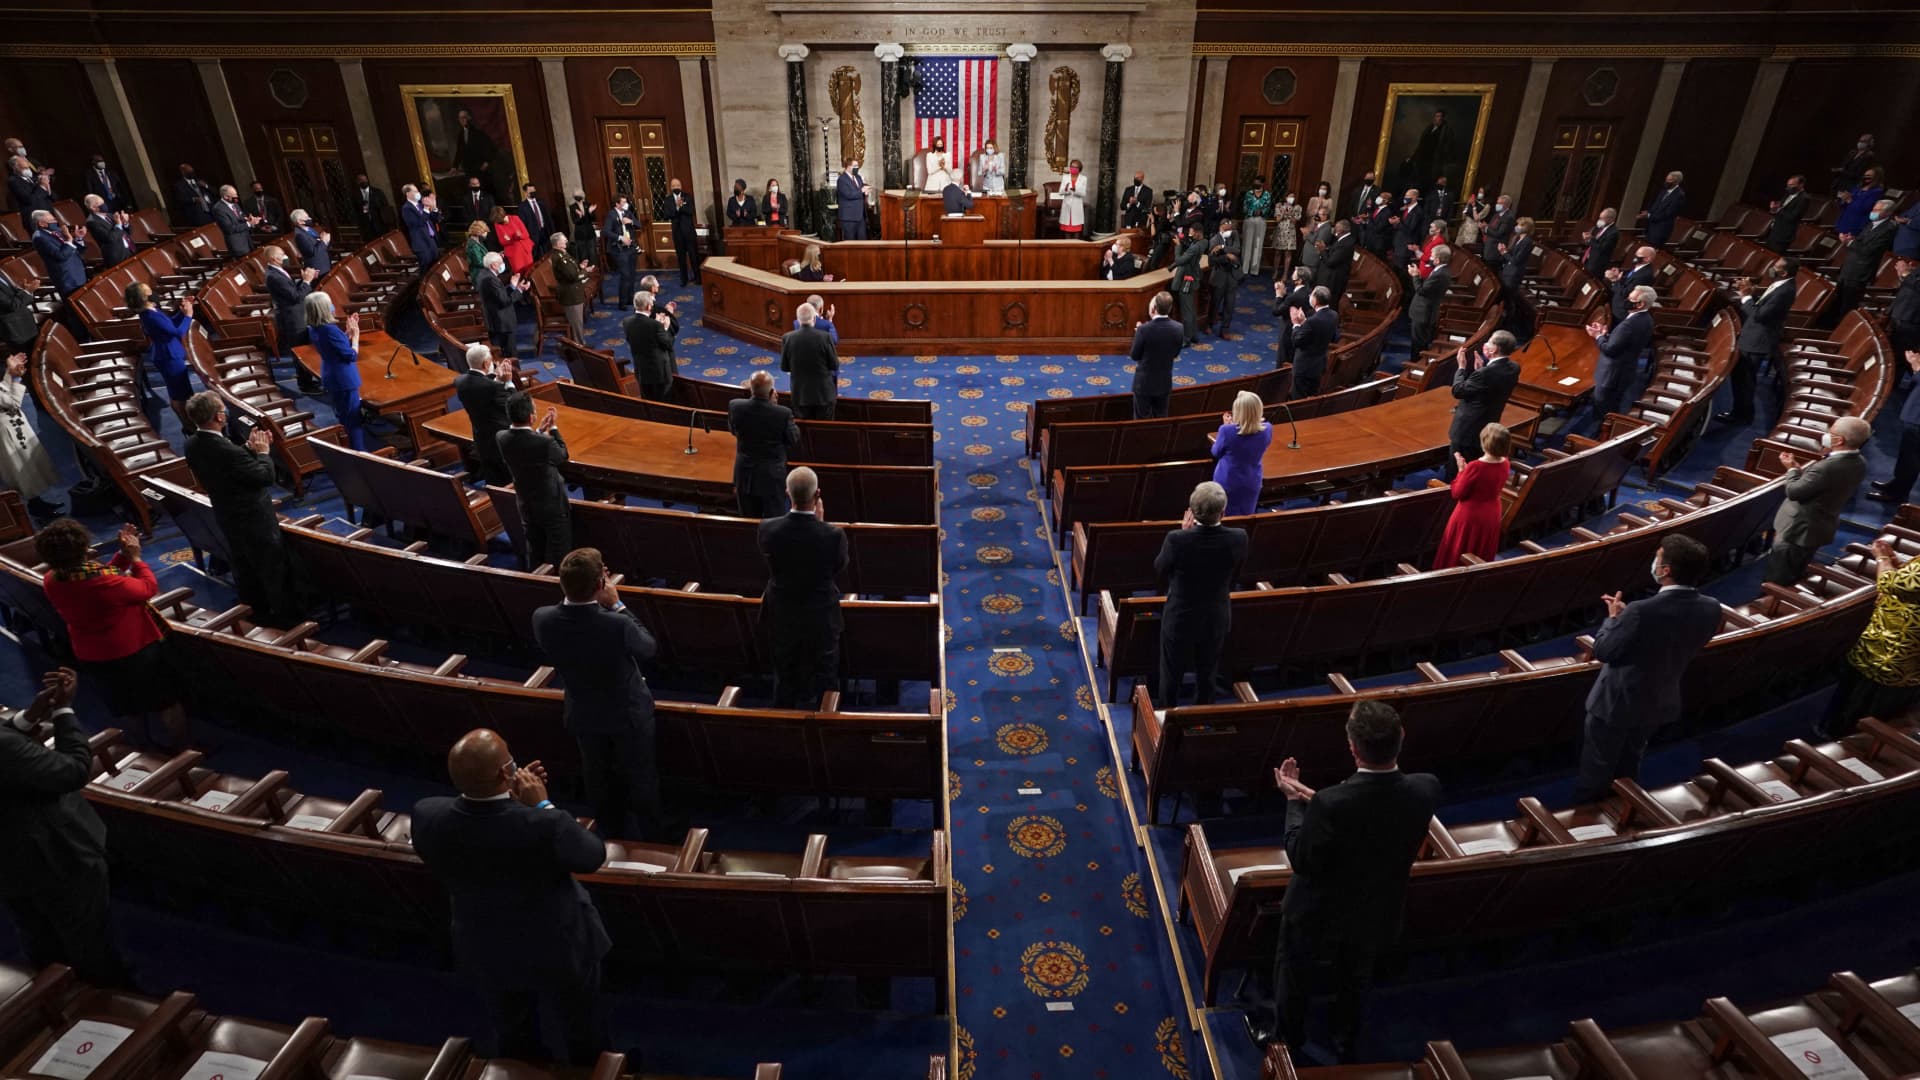 Socially distanced members of Congress stand as US President Joe Biden addresses a joint session of Congress at the US Capitol in Washington, DC, on April 28, 2021.